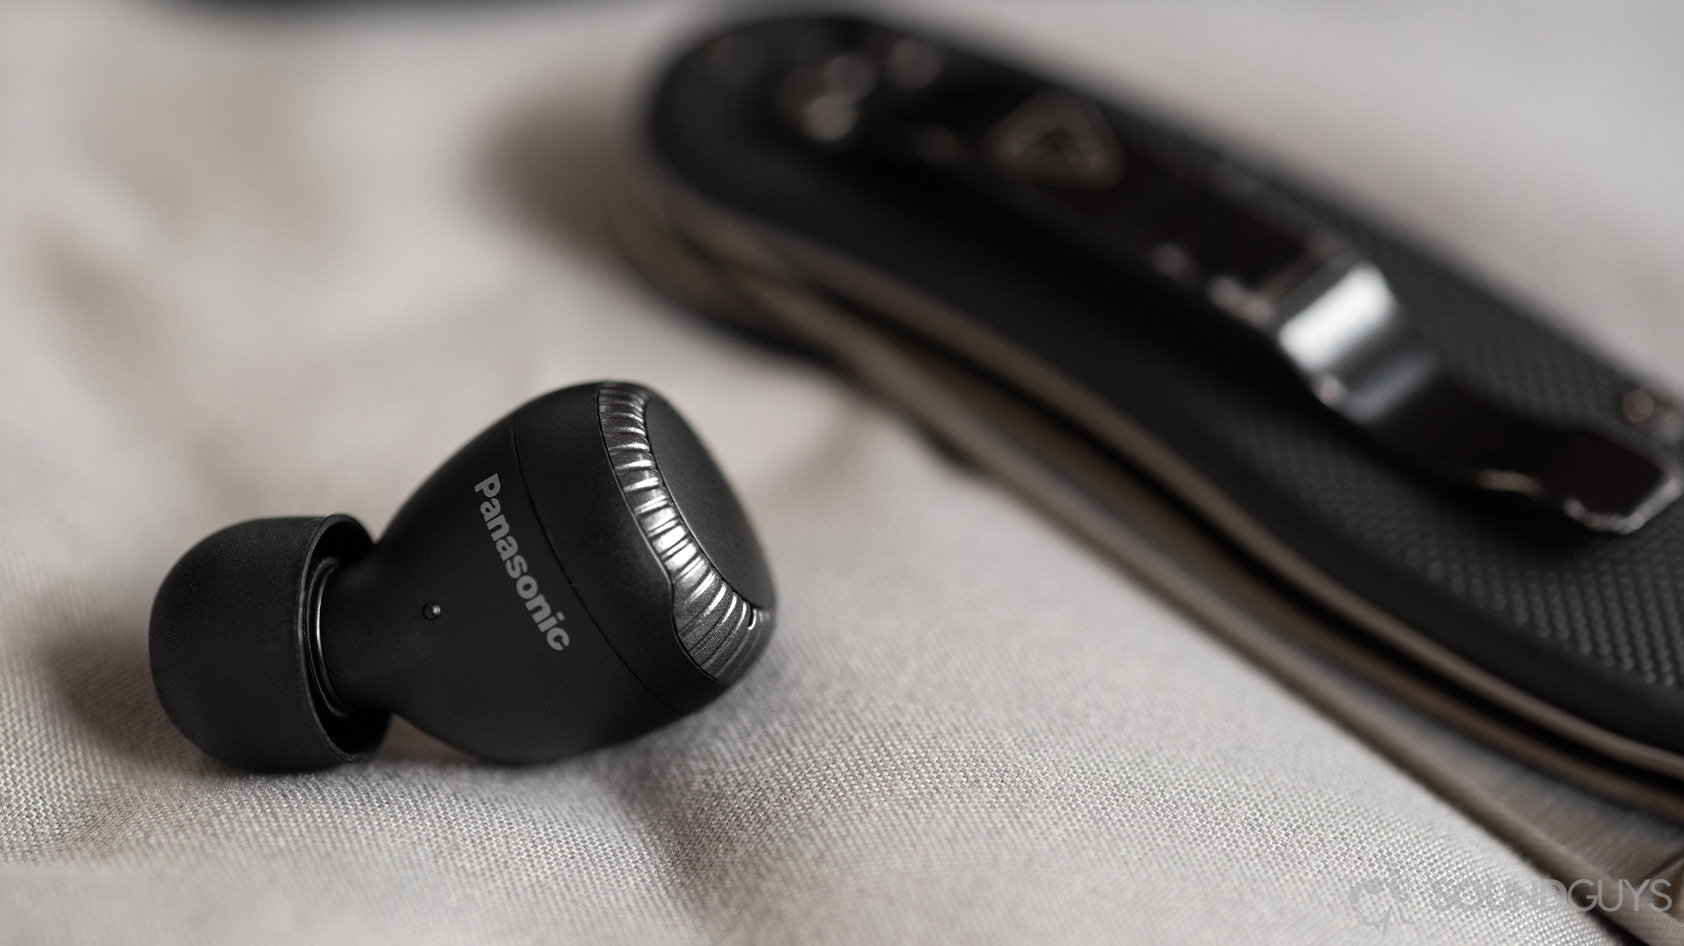 A photo of the Panasonic RZ-S300W true wireless earbud with the Panasonic logo in focus.